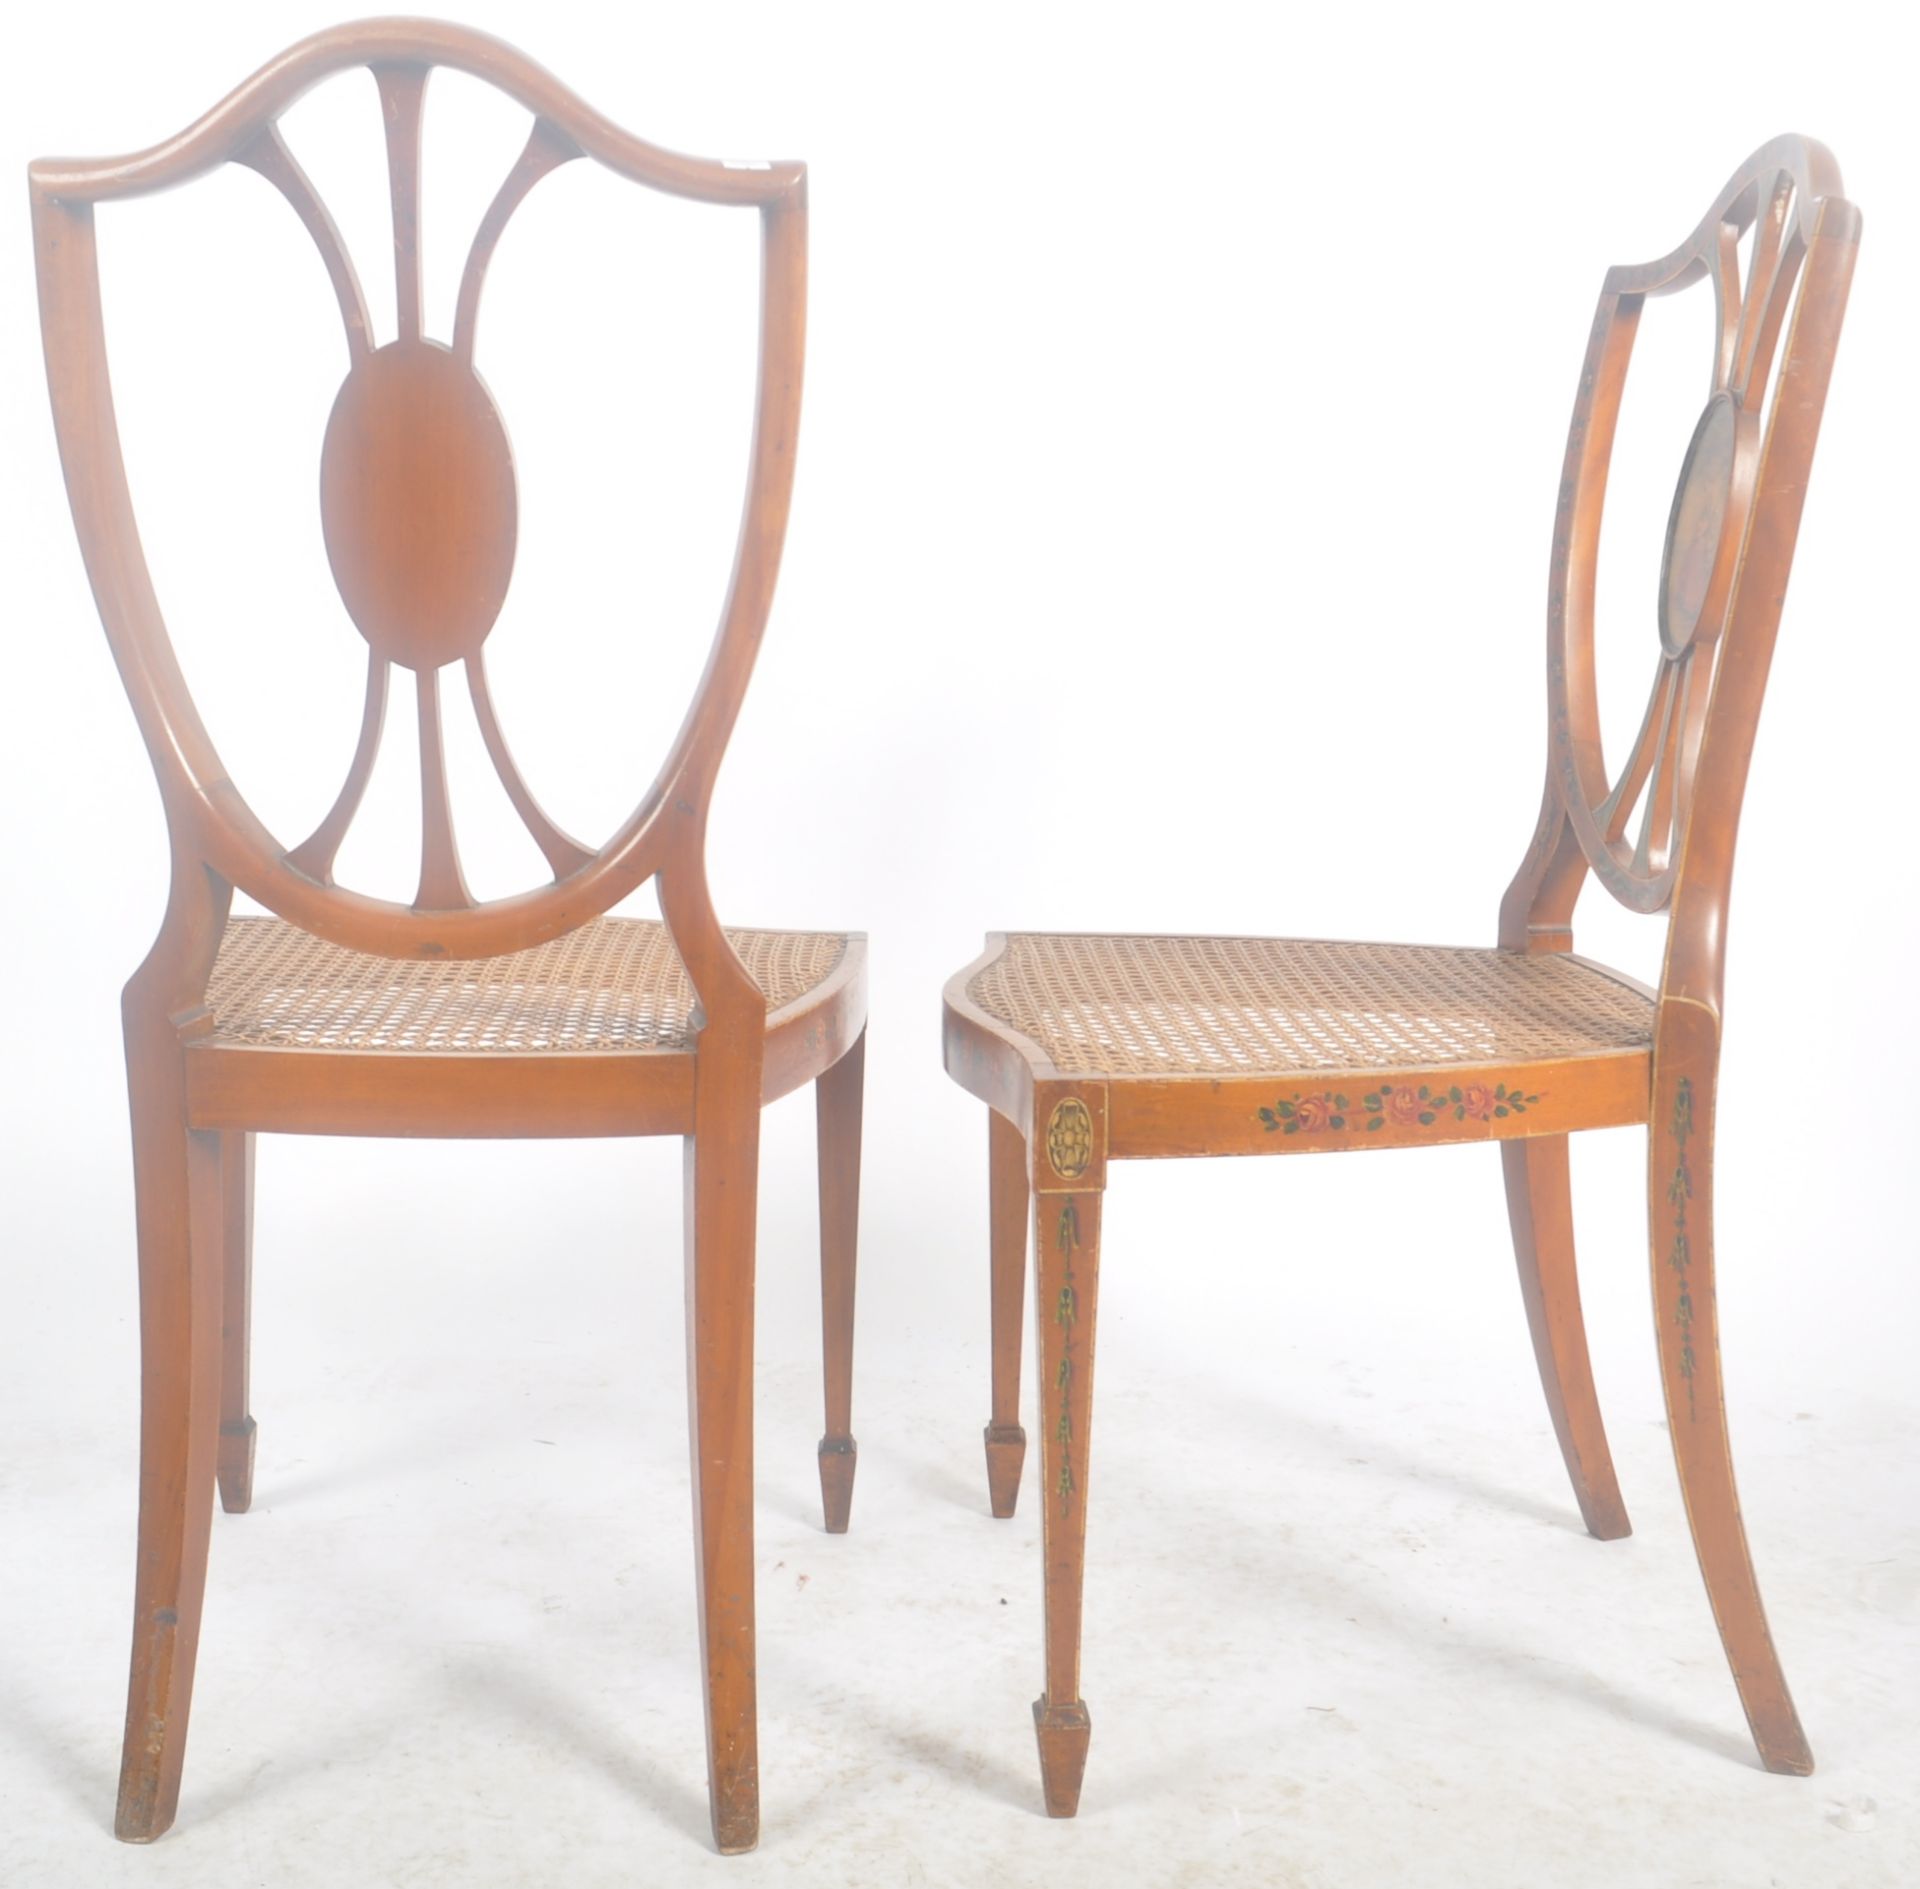 SET OF THREE PAINTED FAUX SATINWOOD SHIELD BACK CHAIRS - Image 8 of 8